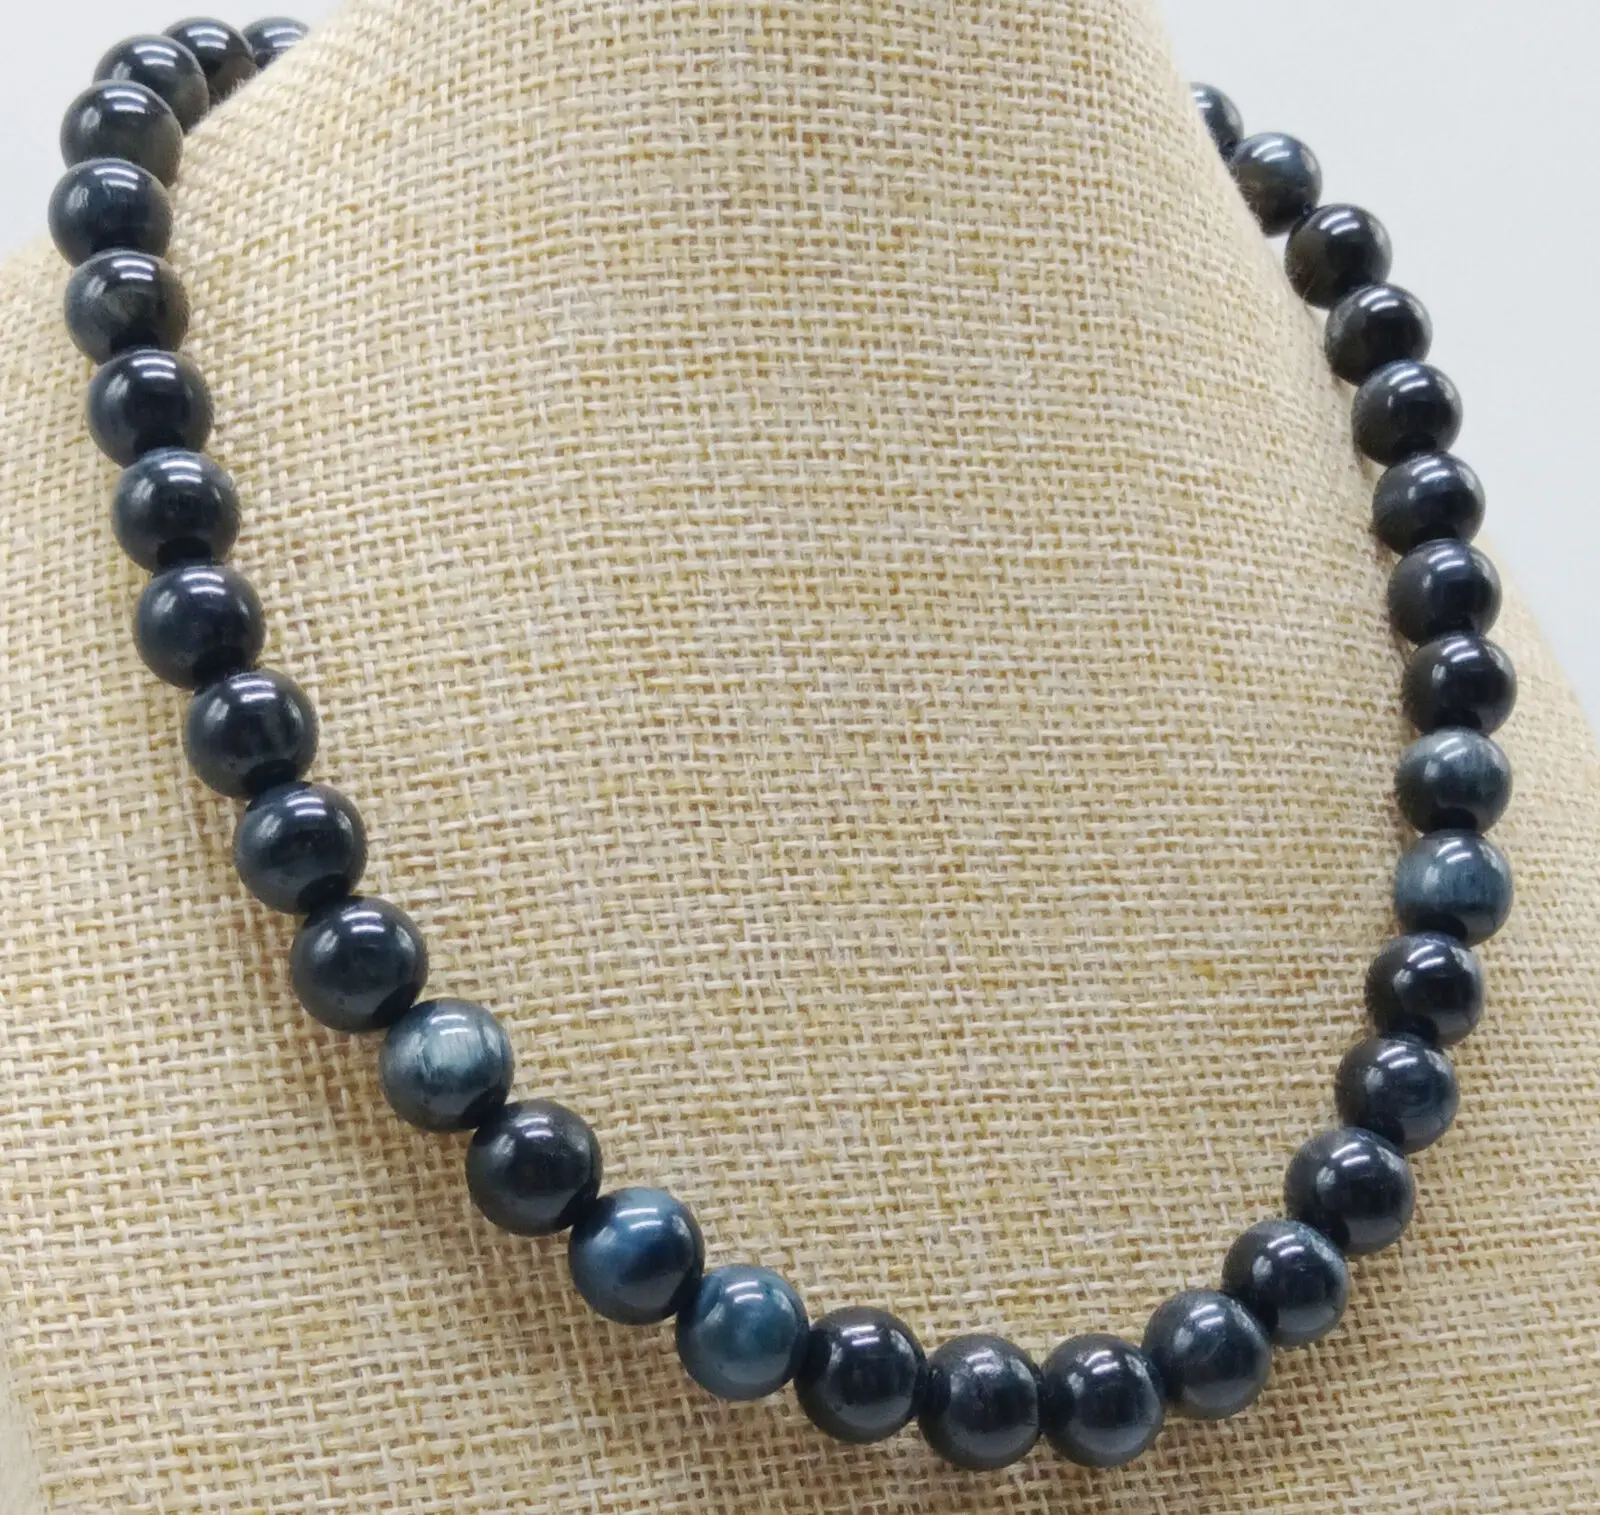 

100% Natural 10mm Hawk's Eye Stone Round Gemstone Beads Knotted Necklace 20 Inch